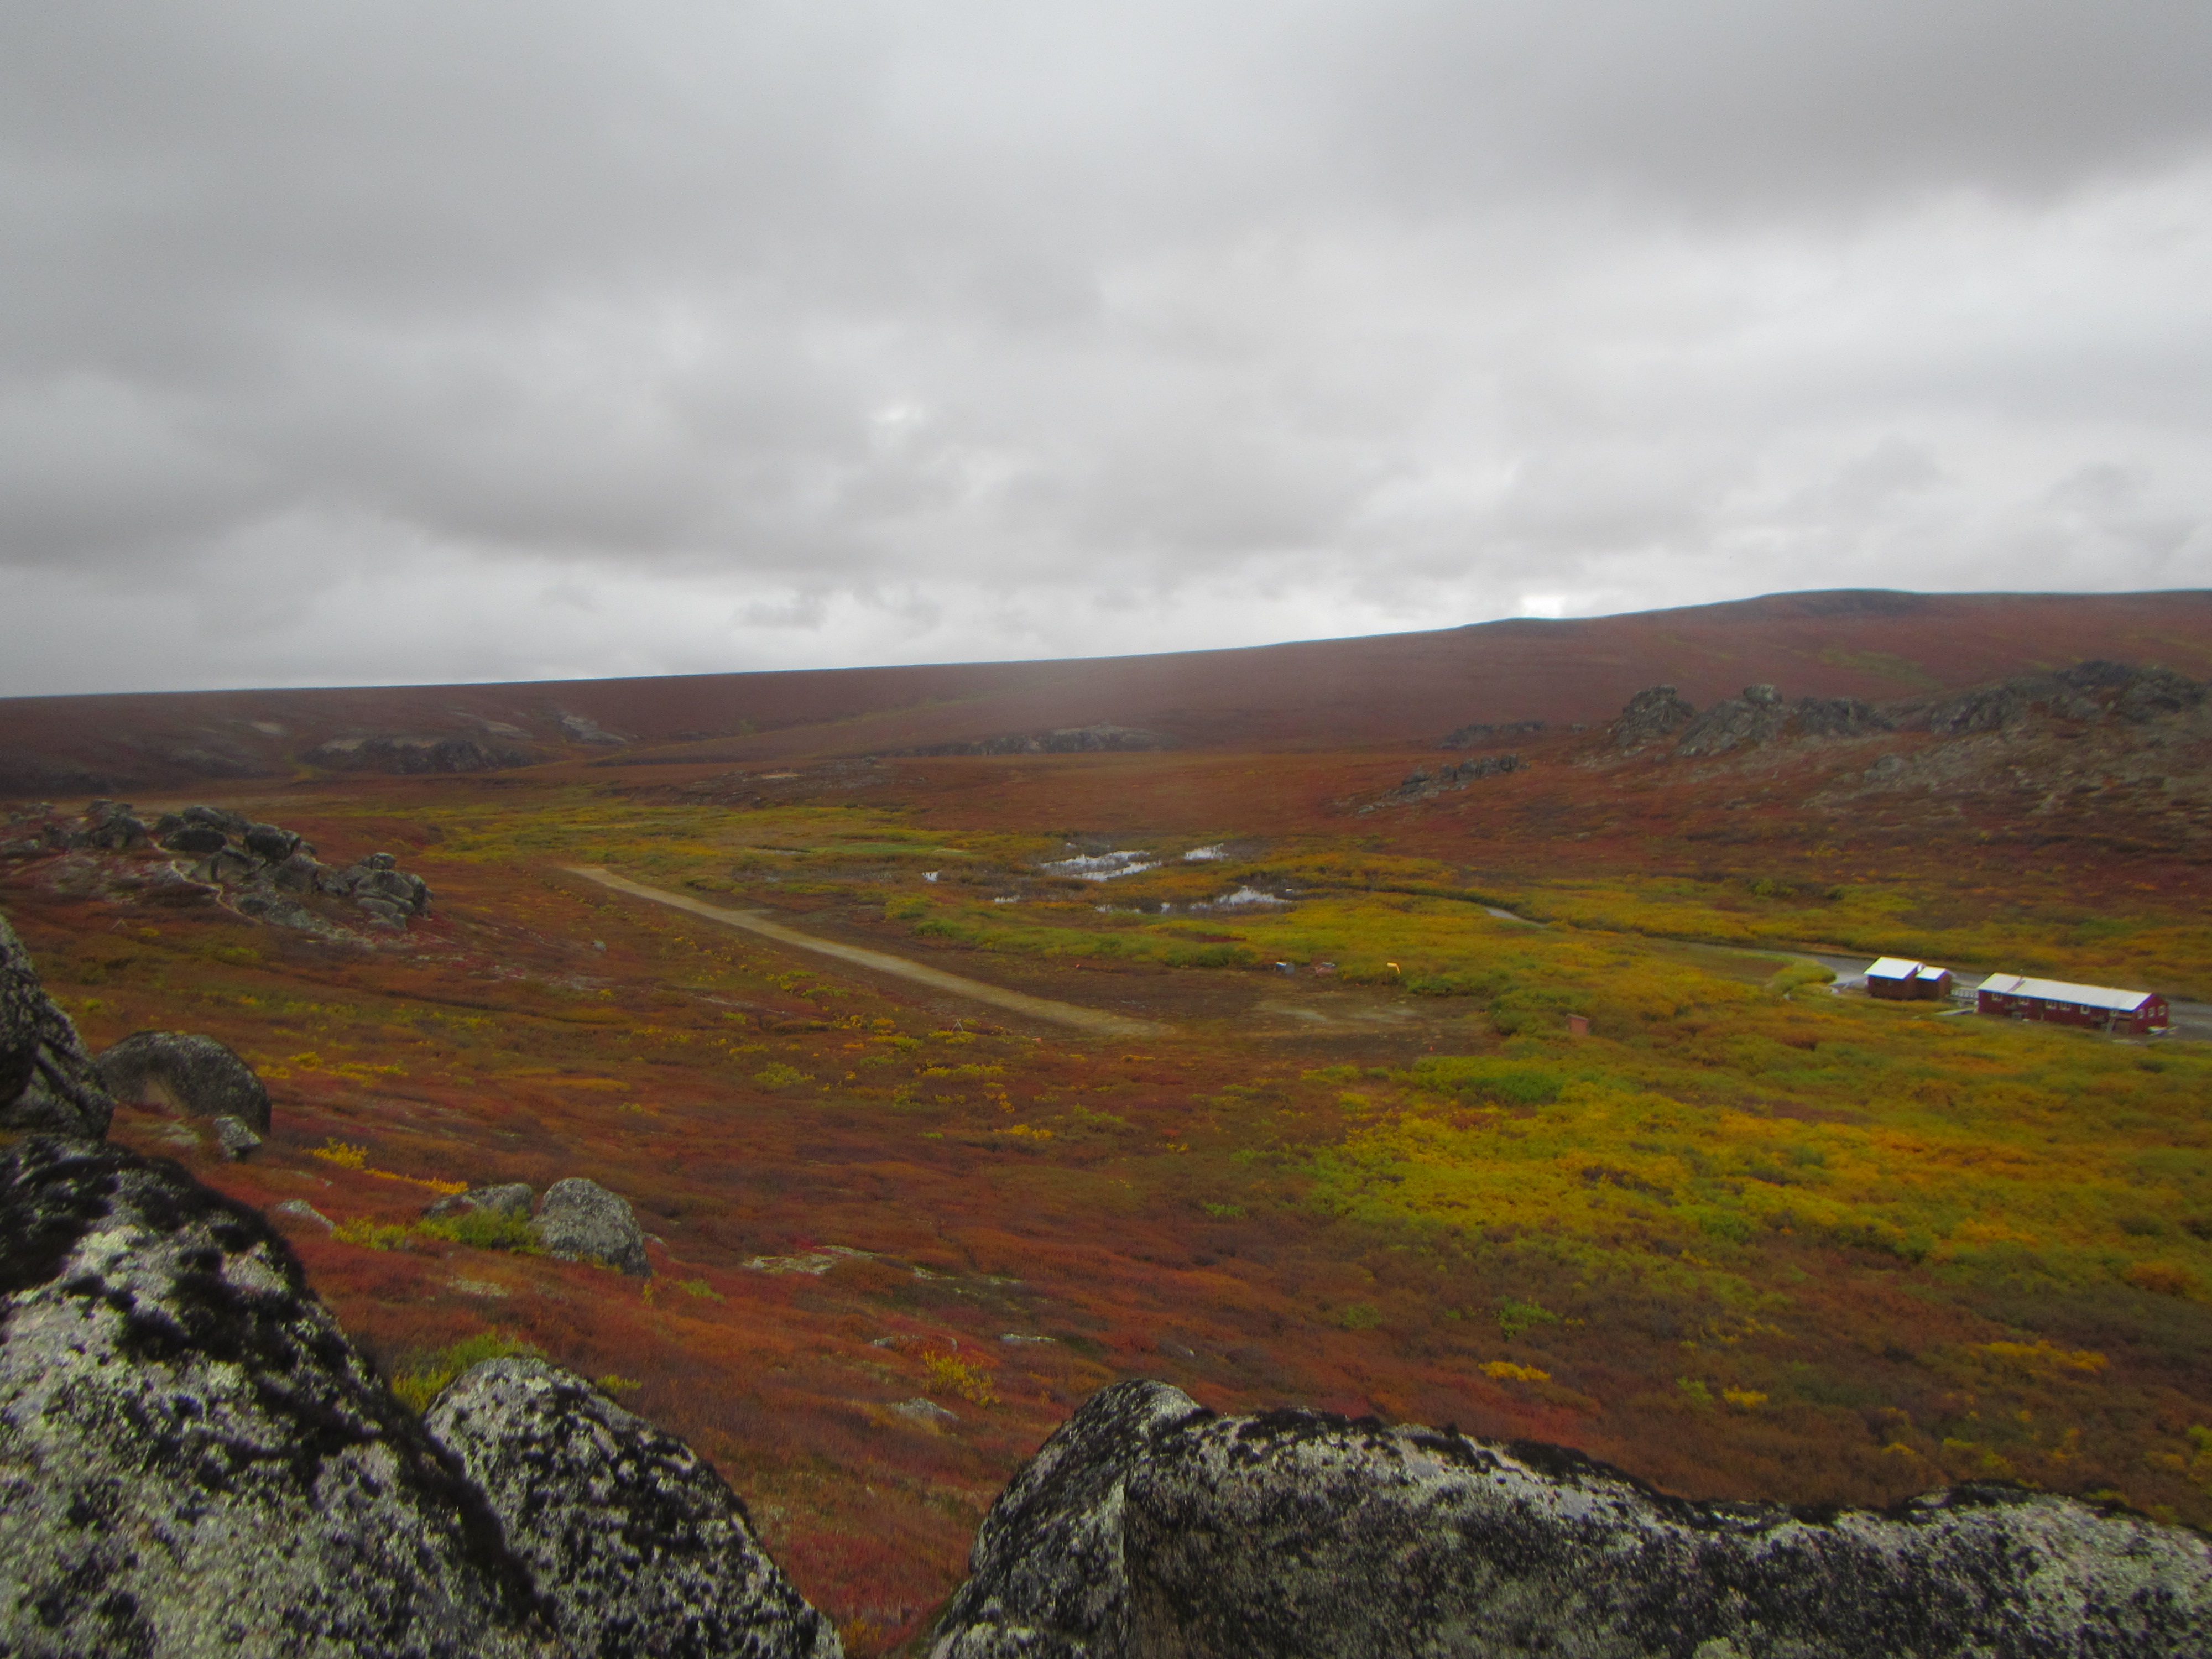 The Serpentine airstrip extending across the red and green tundra. On the right, the Serpentine bunkhouse and bathhouse sit next to Hot Springs Creek.